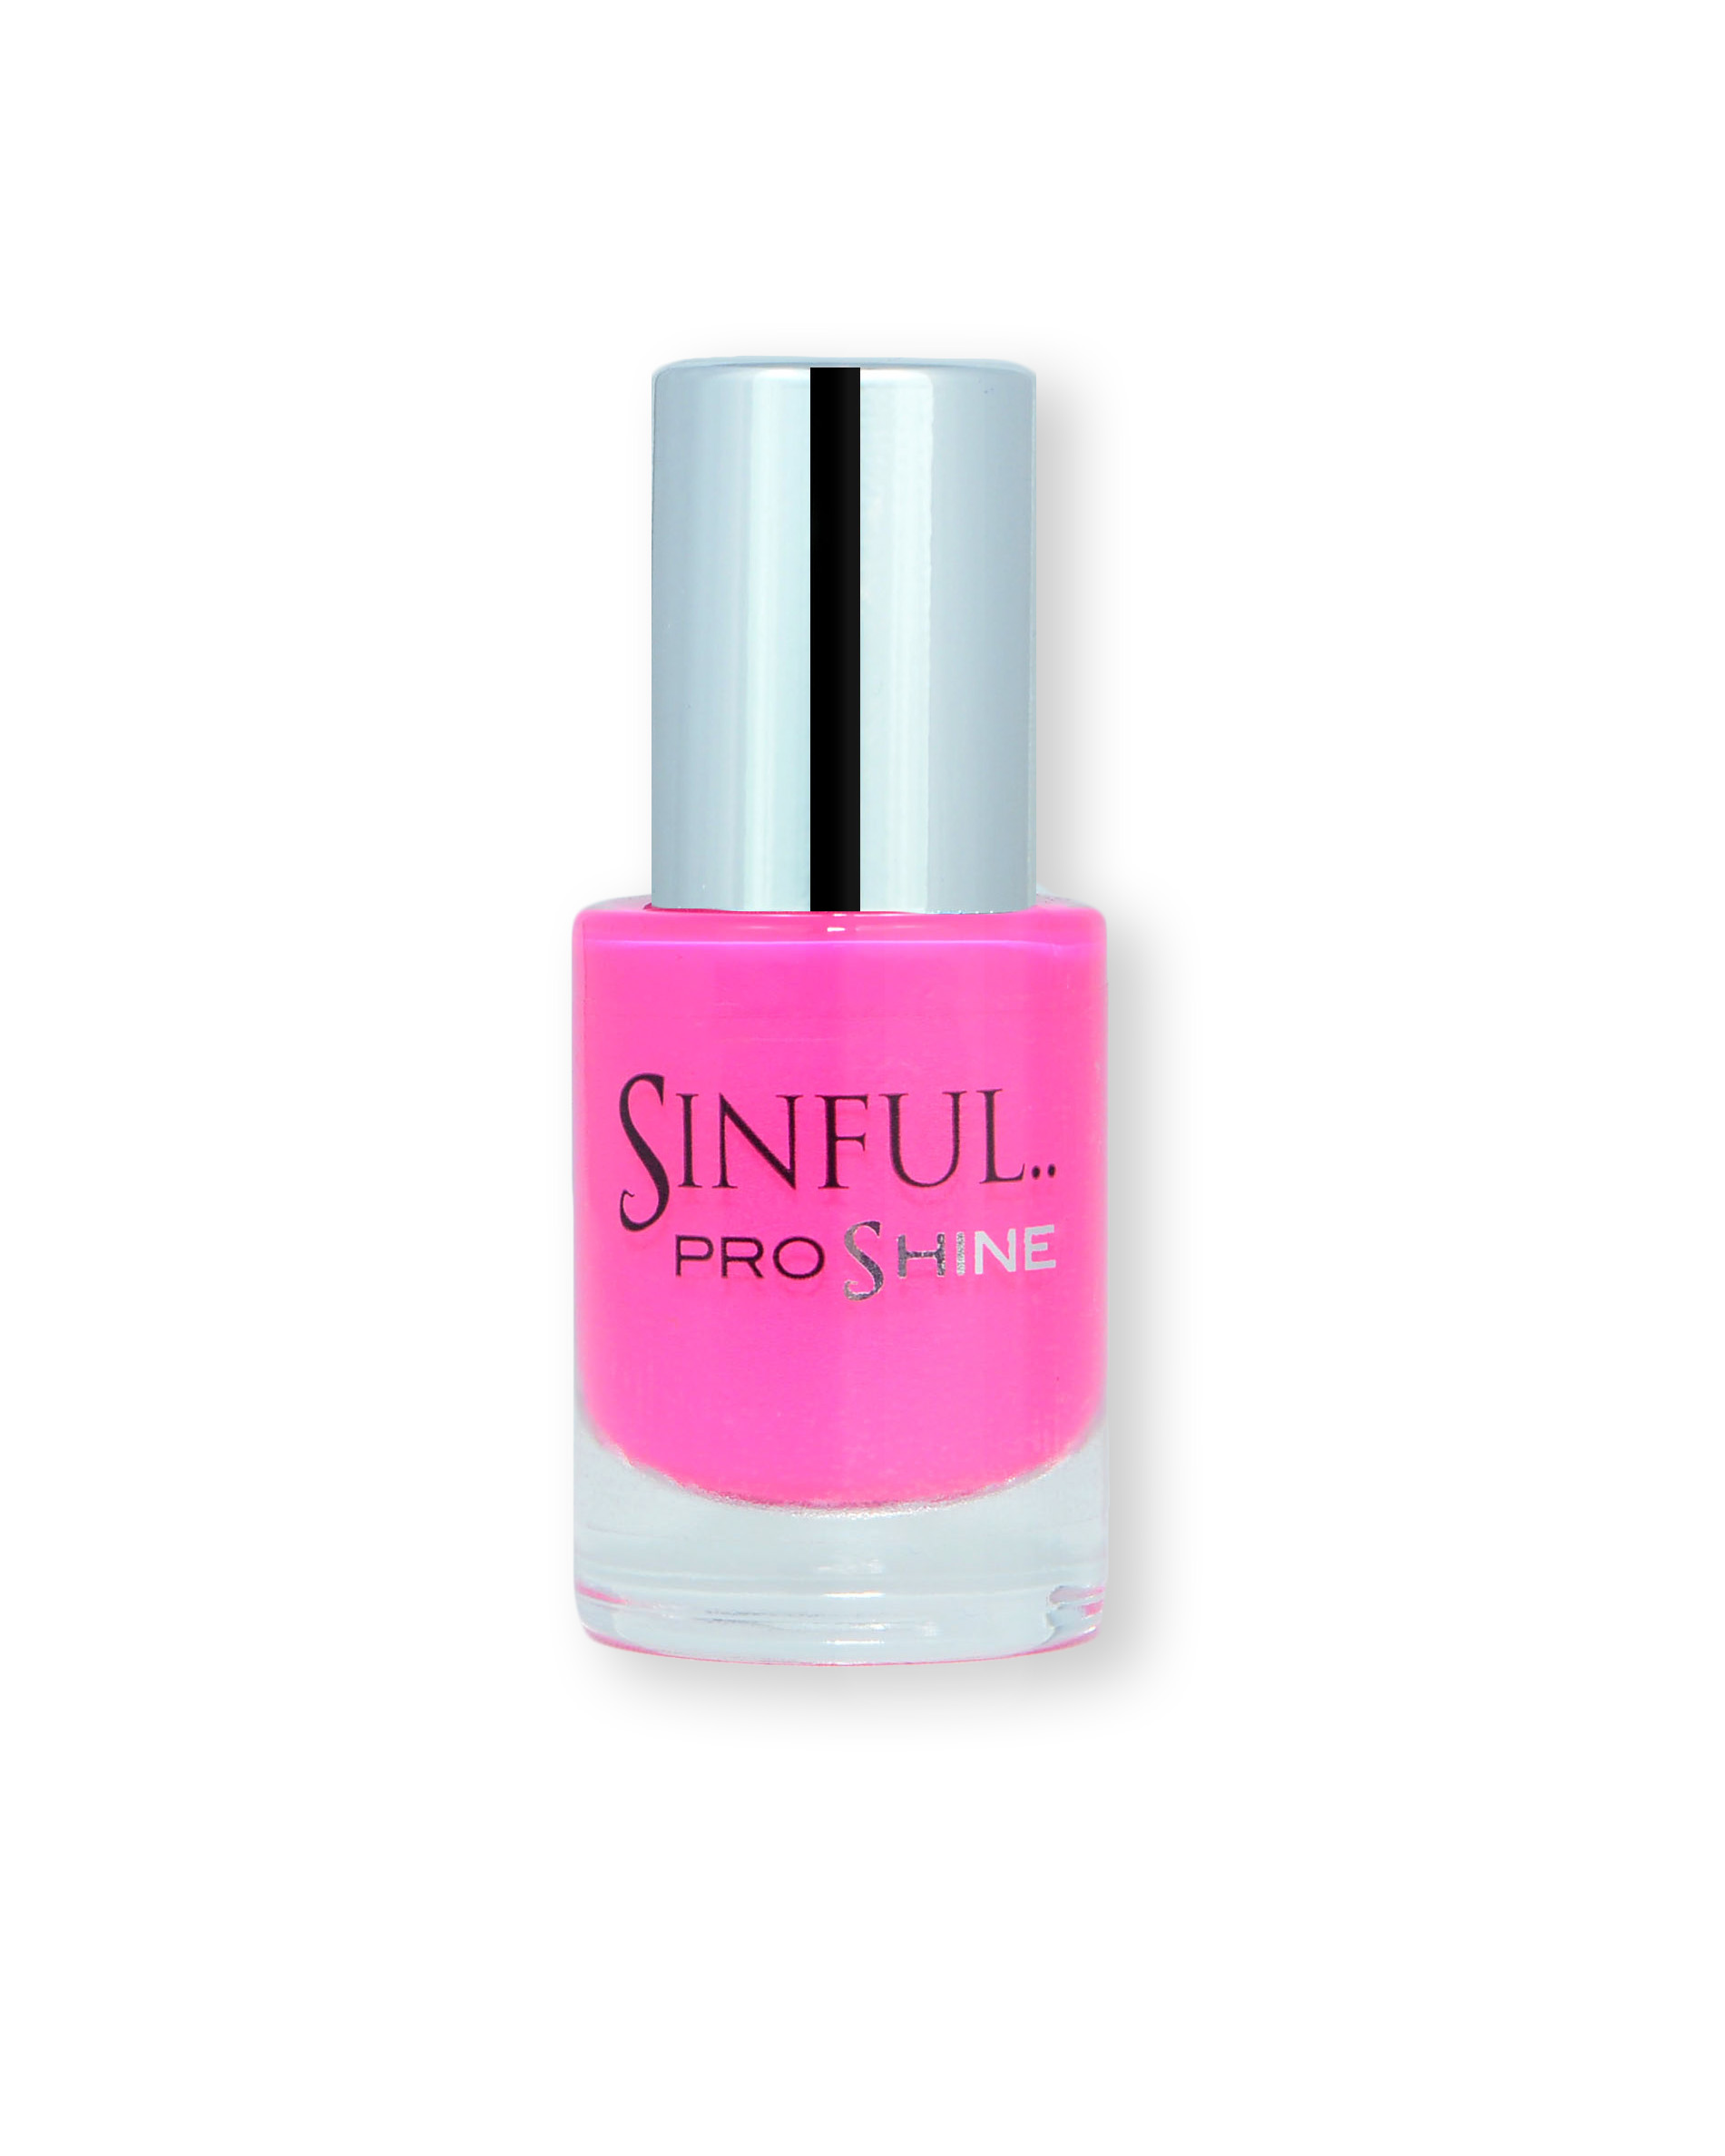 Sinful PROshine is a revolution into top spec imitation gel-like formula, easy application, full coverage and a sleek finish. Spoil yourself with the choice of 42 shades, expertly formulated with the finest grade of pigments. Bombshell: Shocking pink with a creme finish